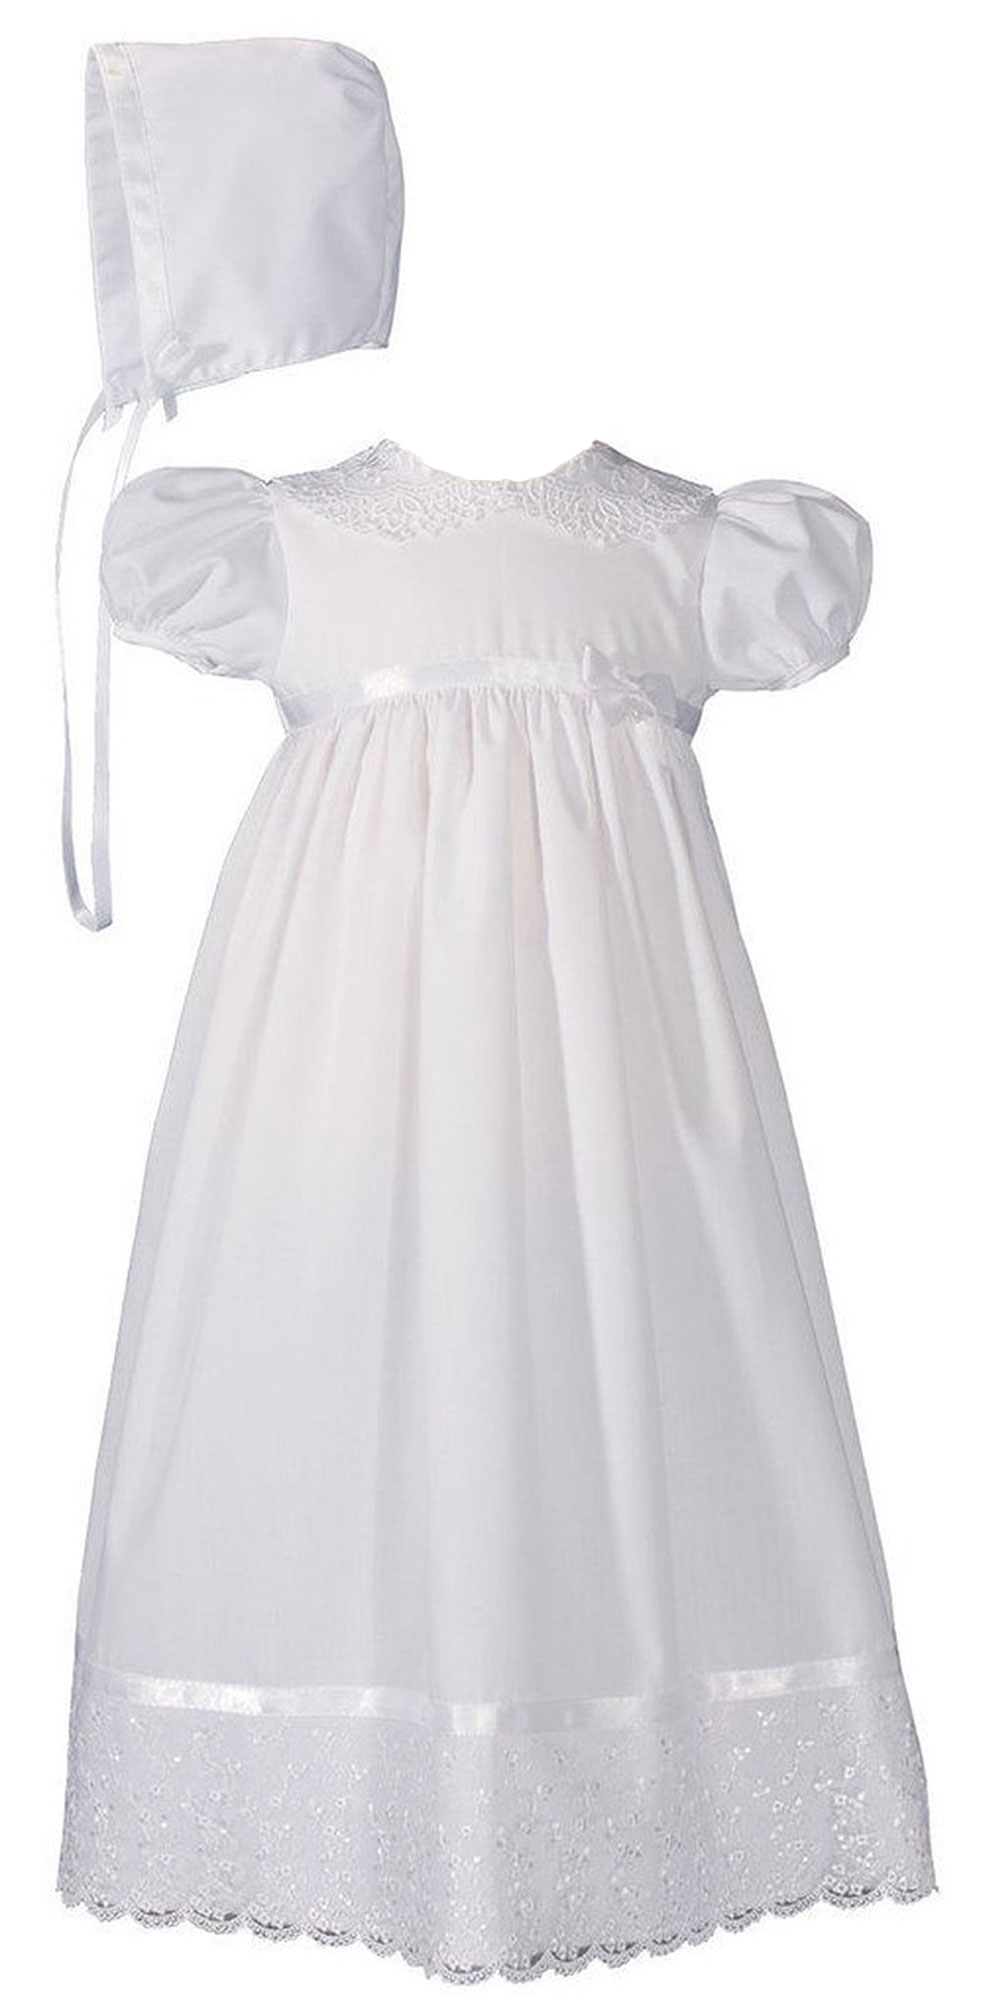 Girls 24" Poly Cotton Christening Baptism Gown with Lace Collar and Hem - Little Things Mean a Lot